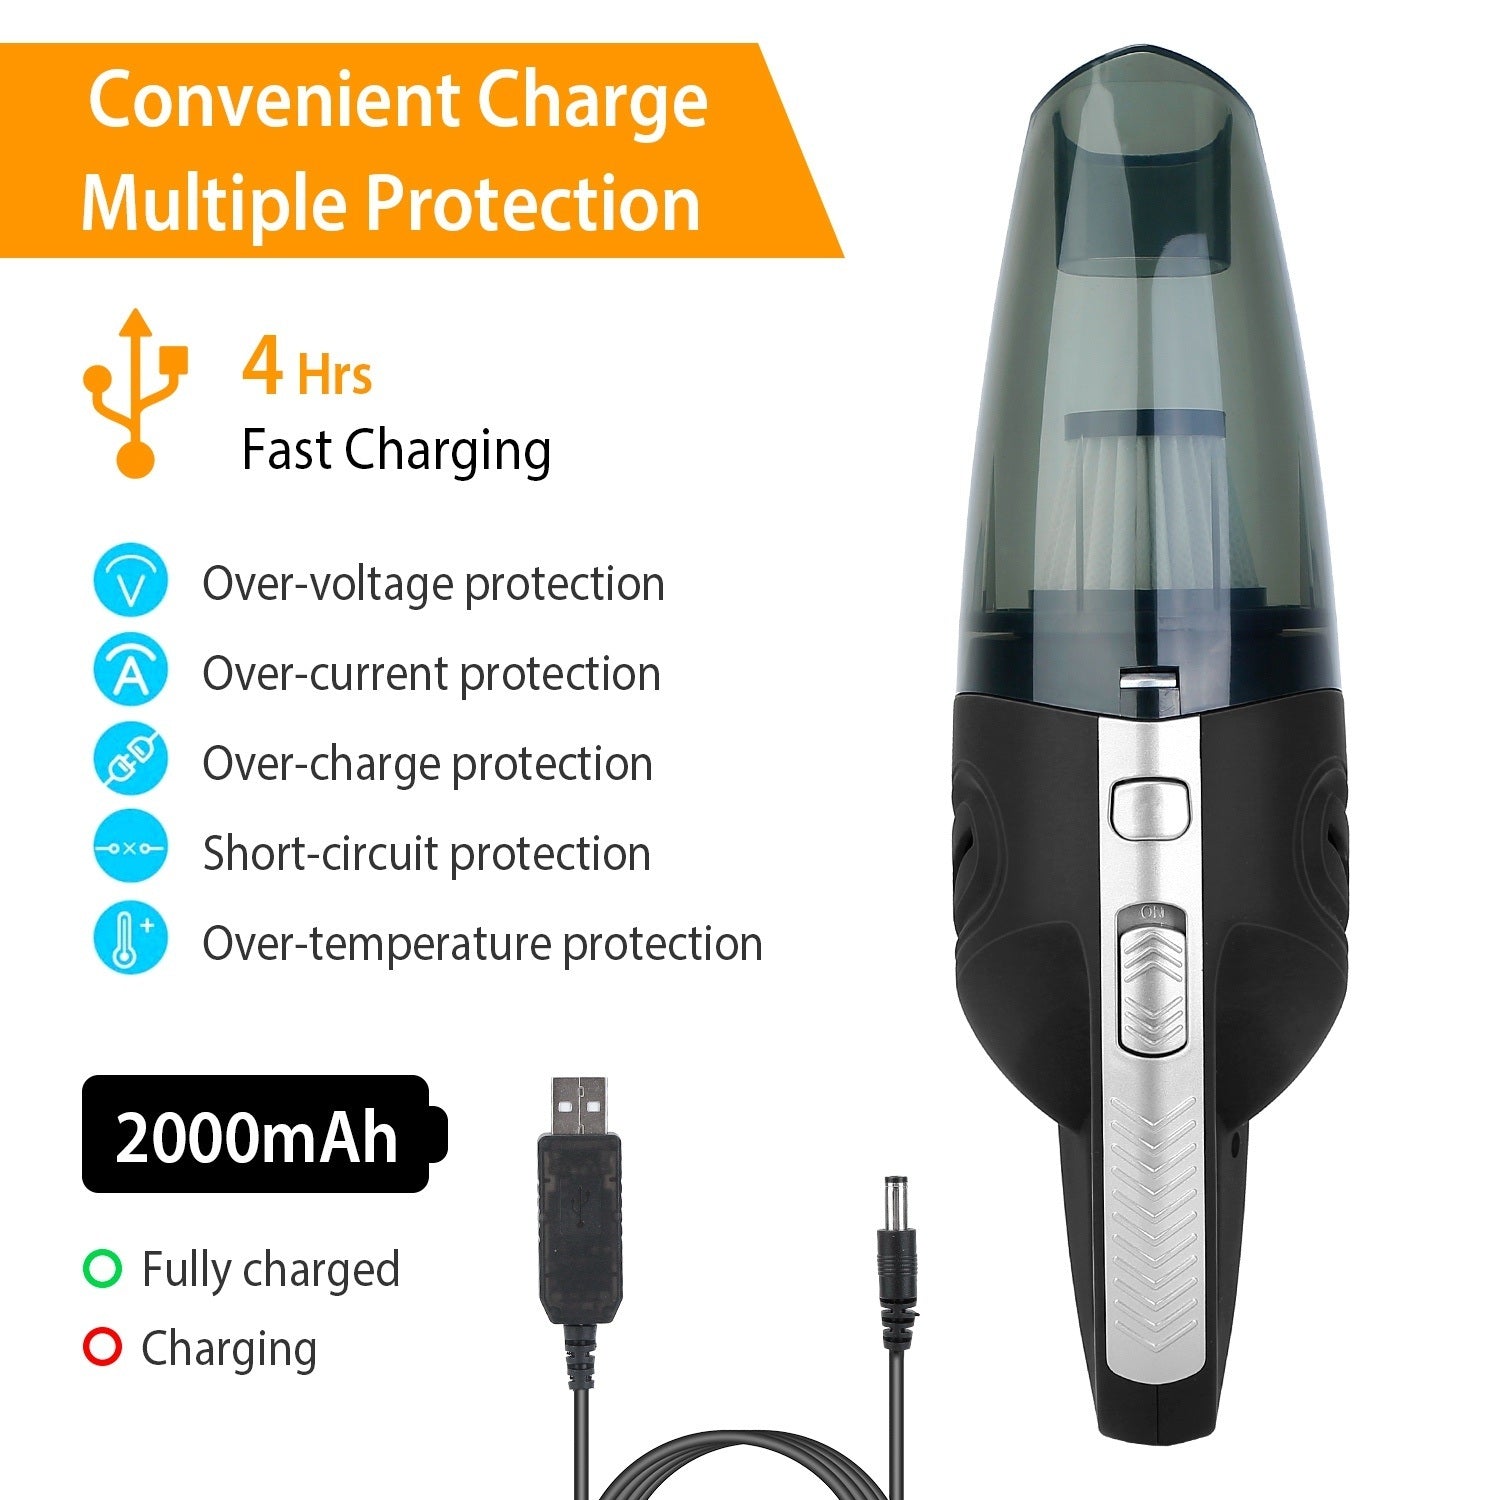 Car Handheld Vacuum Cleaner Cordless Rechargeable Hand Vacuum Portable Strong Suction Vacuum with various nozzles and USB charging cable, featuring graphics demonstrating its use in a car and on furniture.